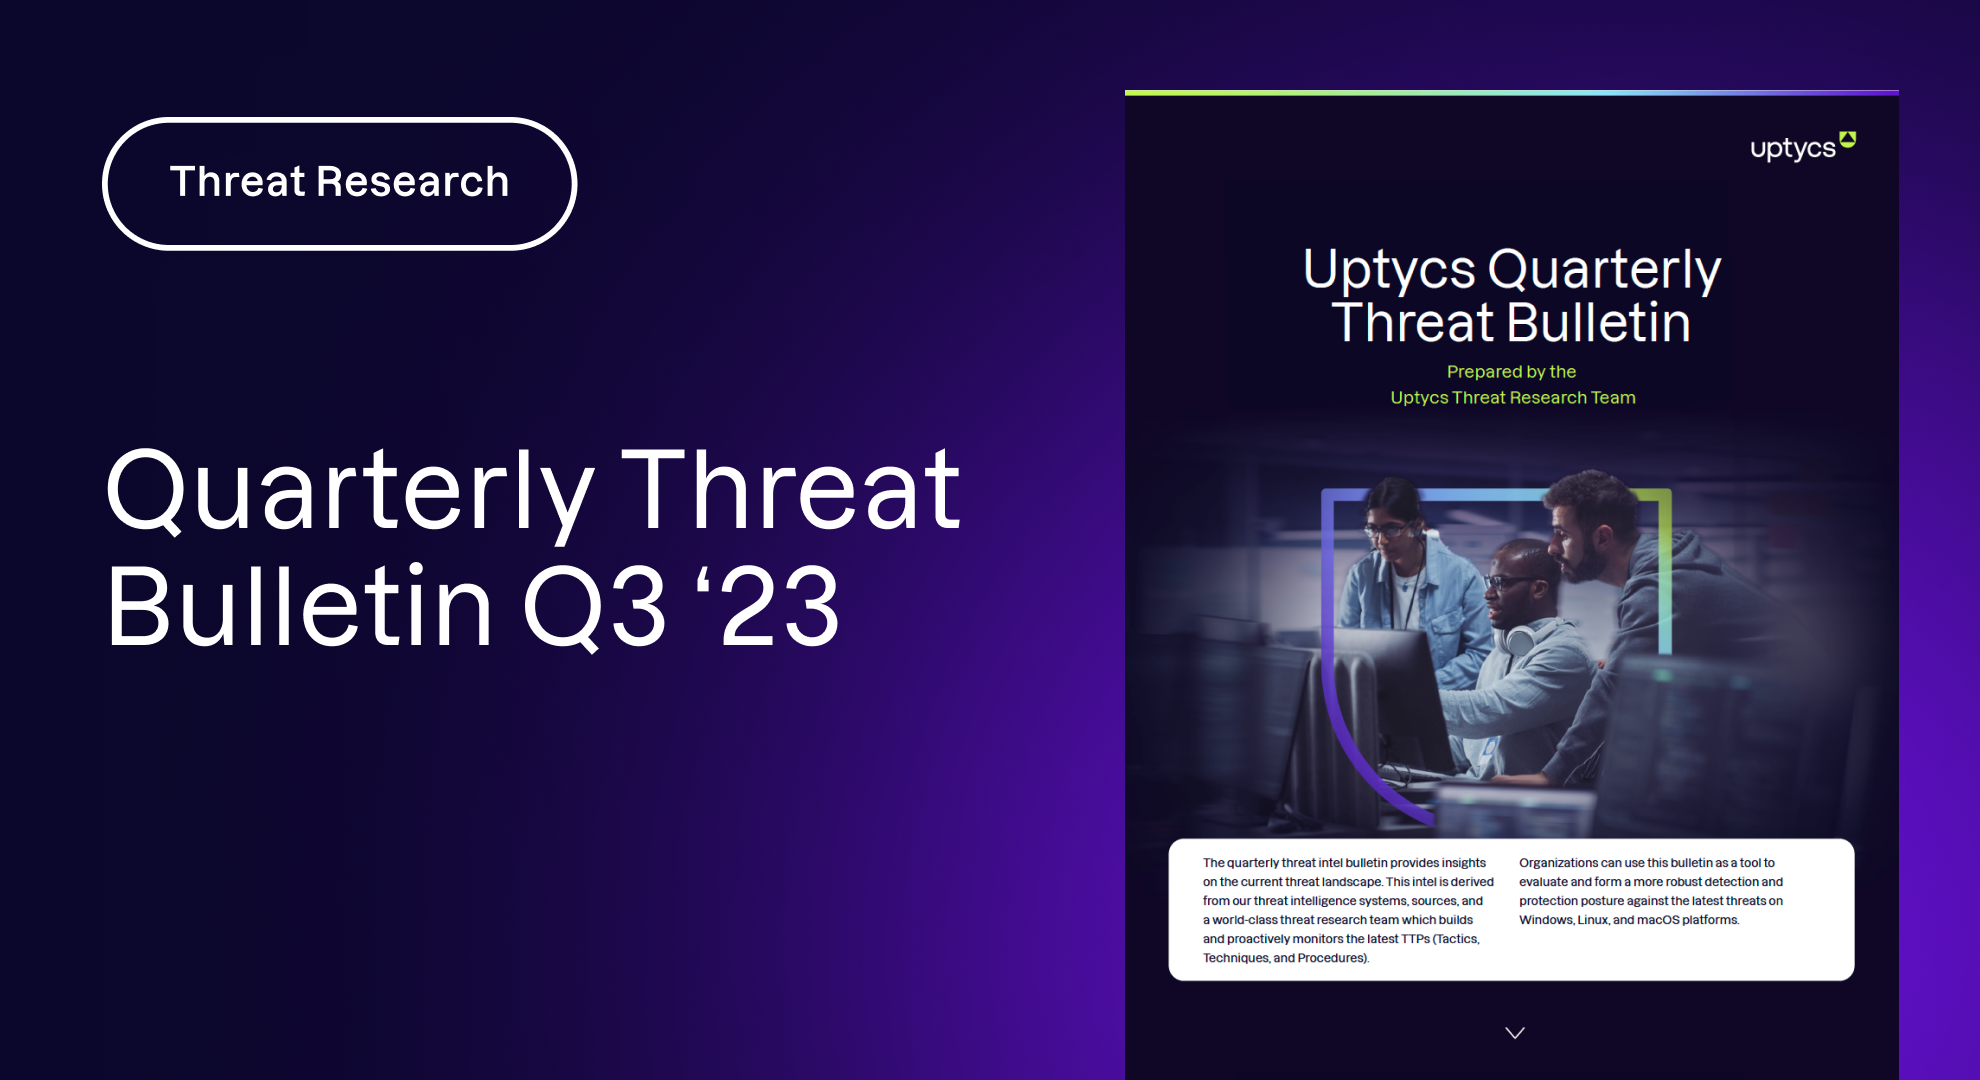 Uptycs Quarterly Threat Bulletin Details WinRAR Zero-Day Vuln and More